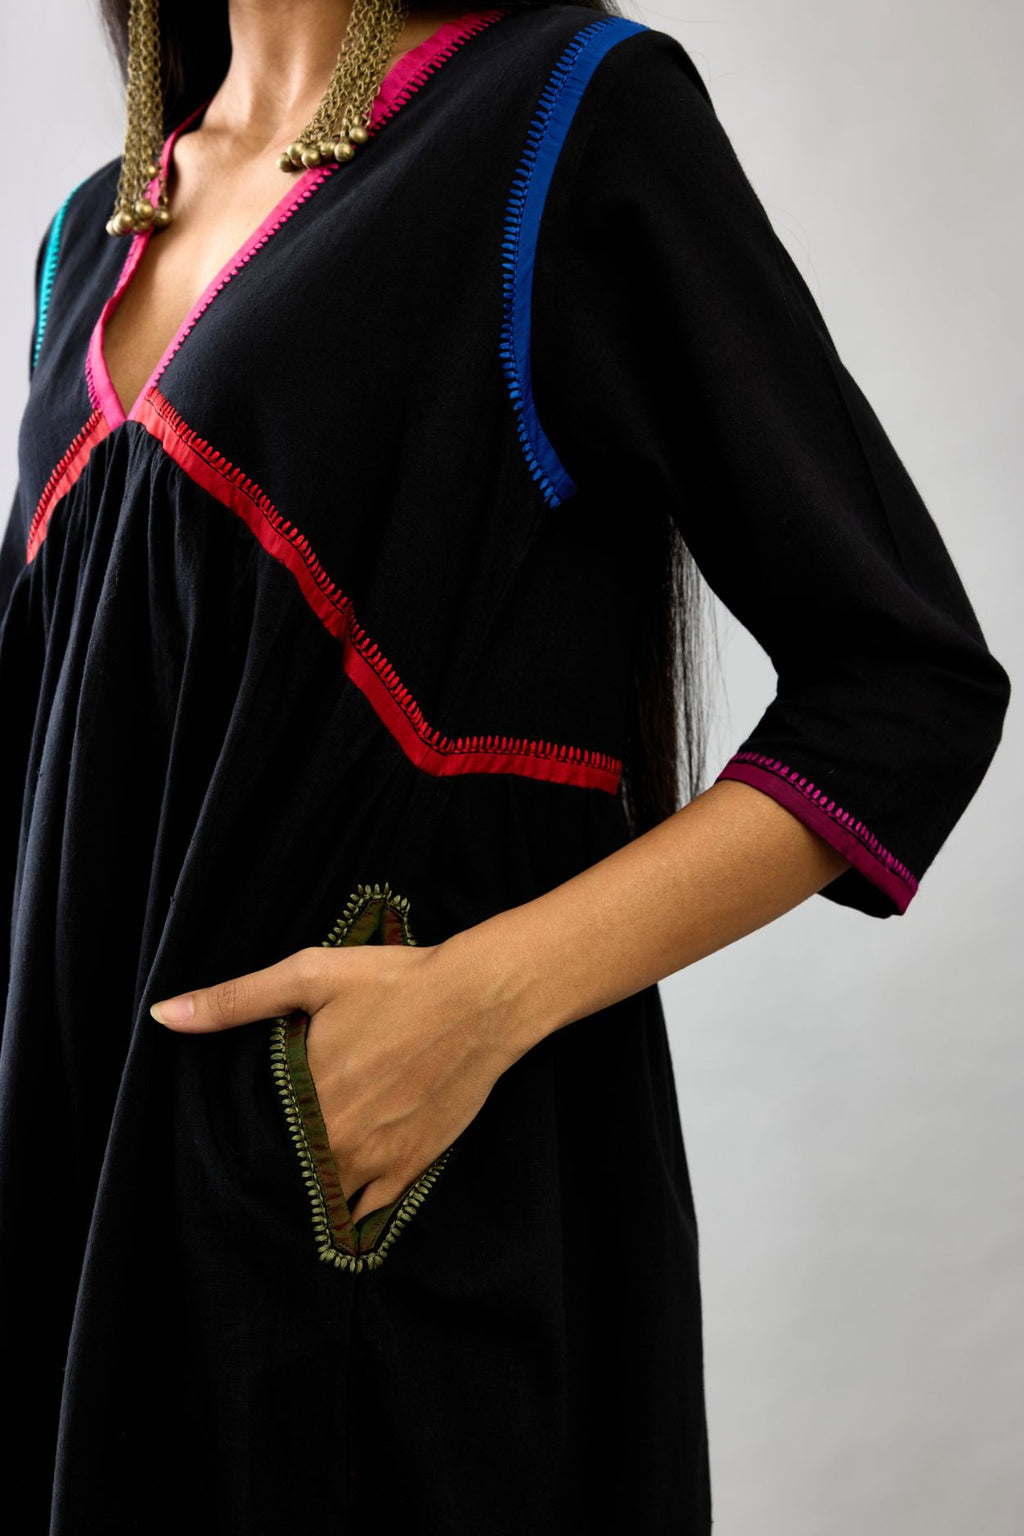 Black Handloom Cotton kurta set dress with multi colored silk facing and embroidery details.